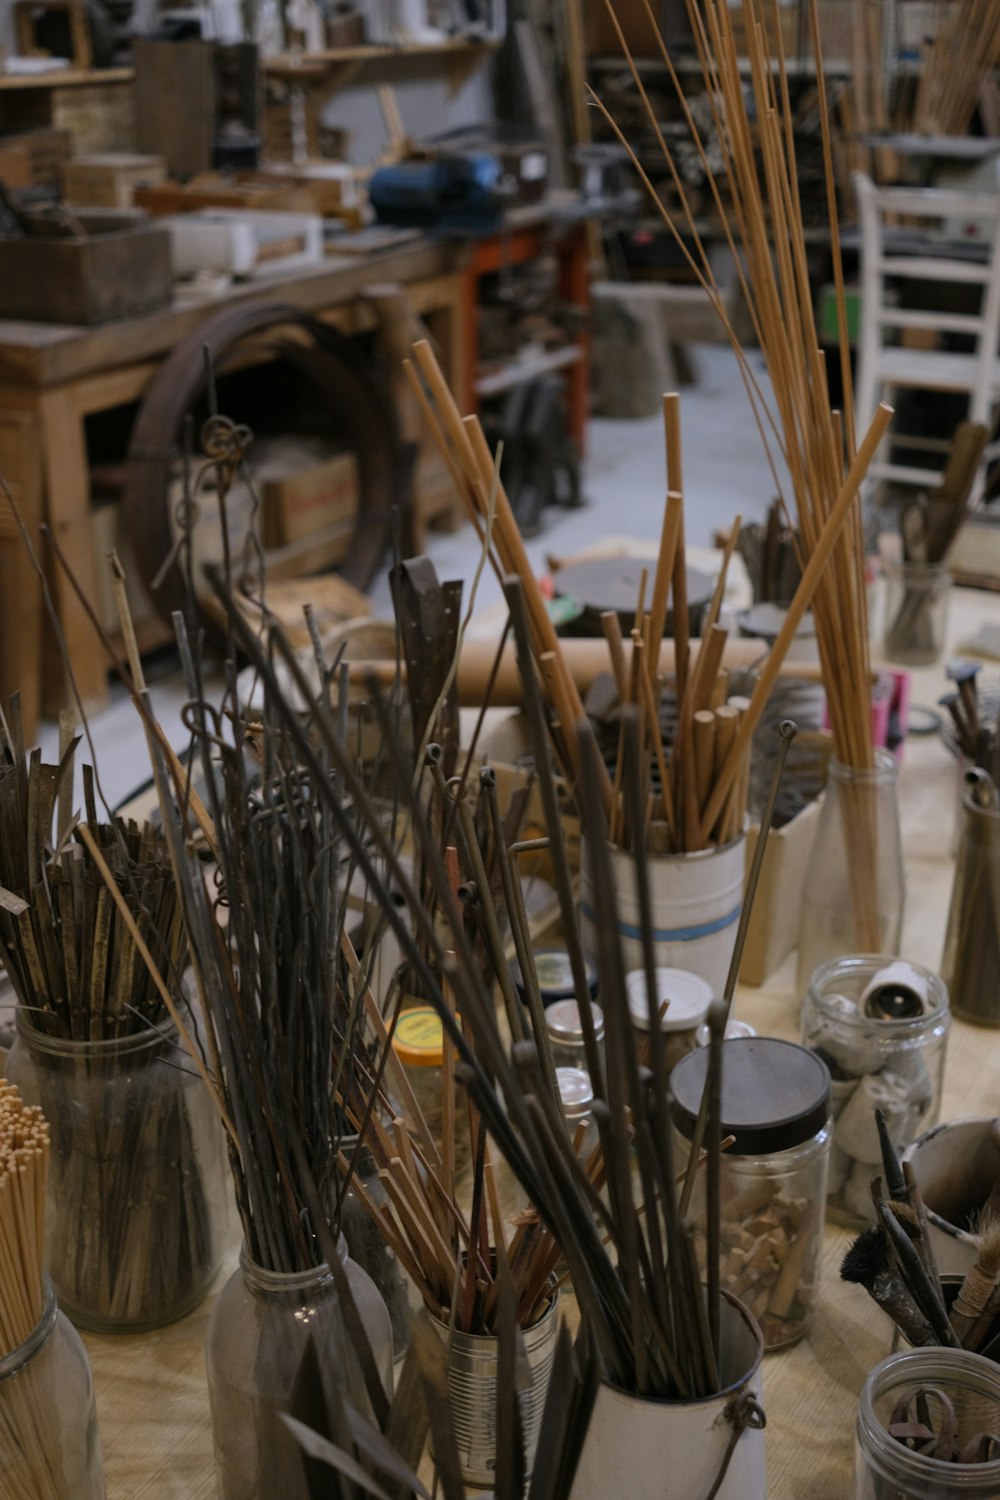 a group of vases filled with lots of sticks